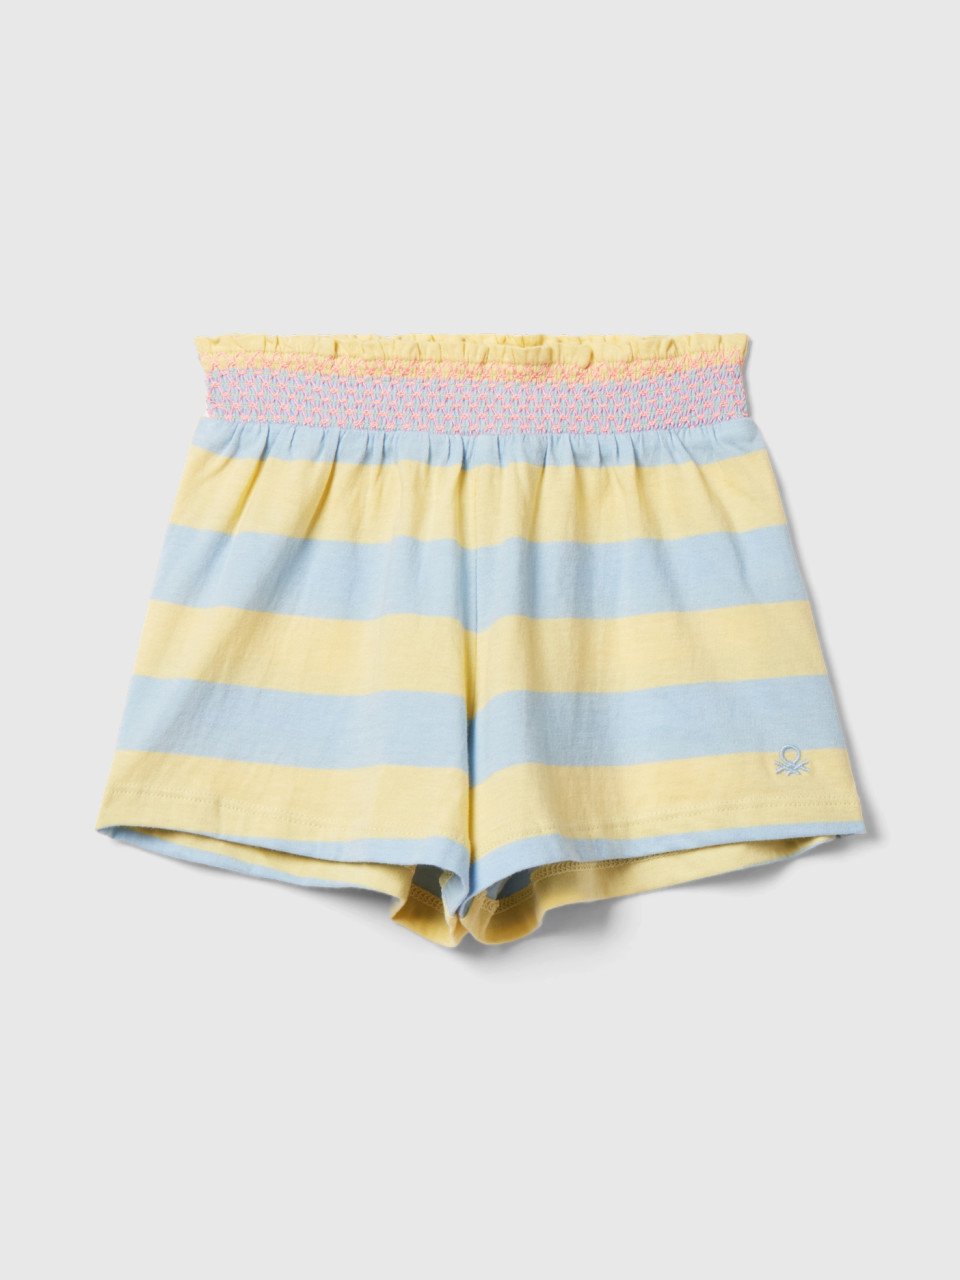 Benetton, Striped Shorts With Ruffles, Multi-color, Kids